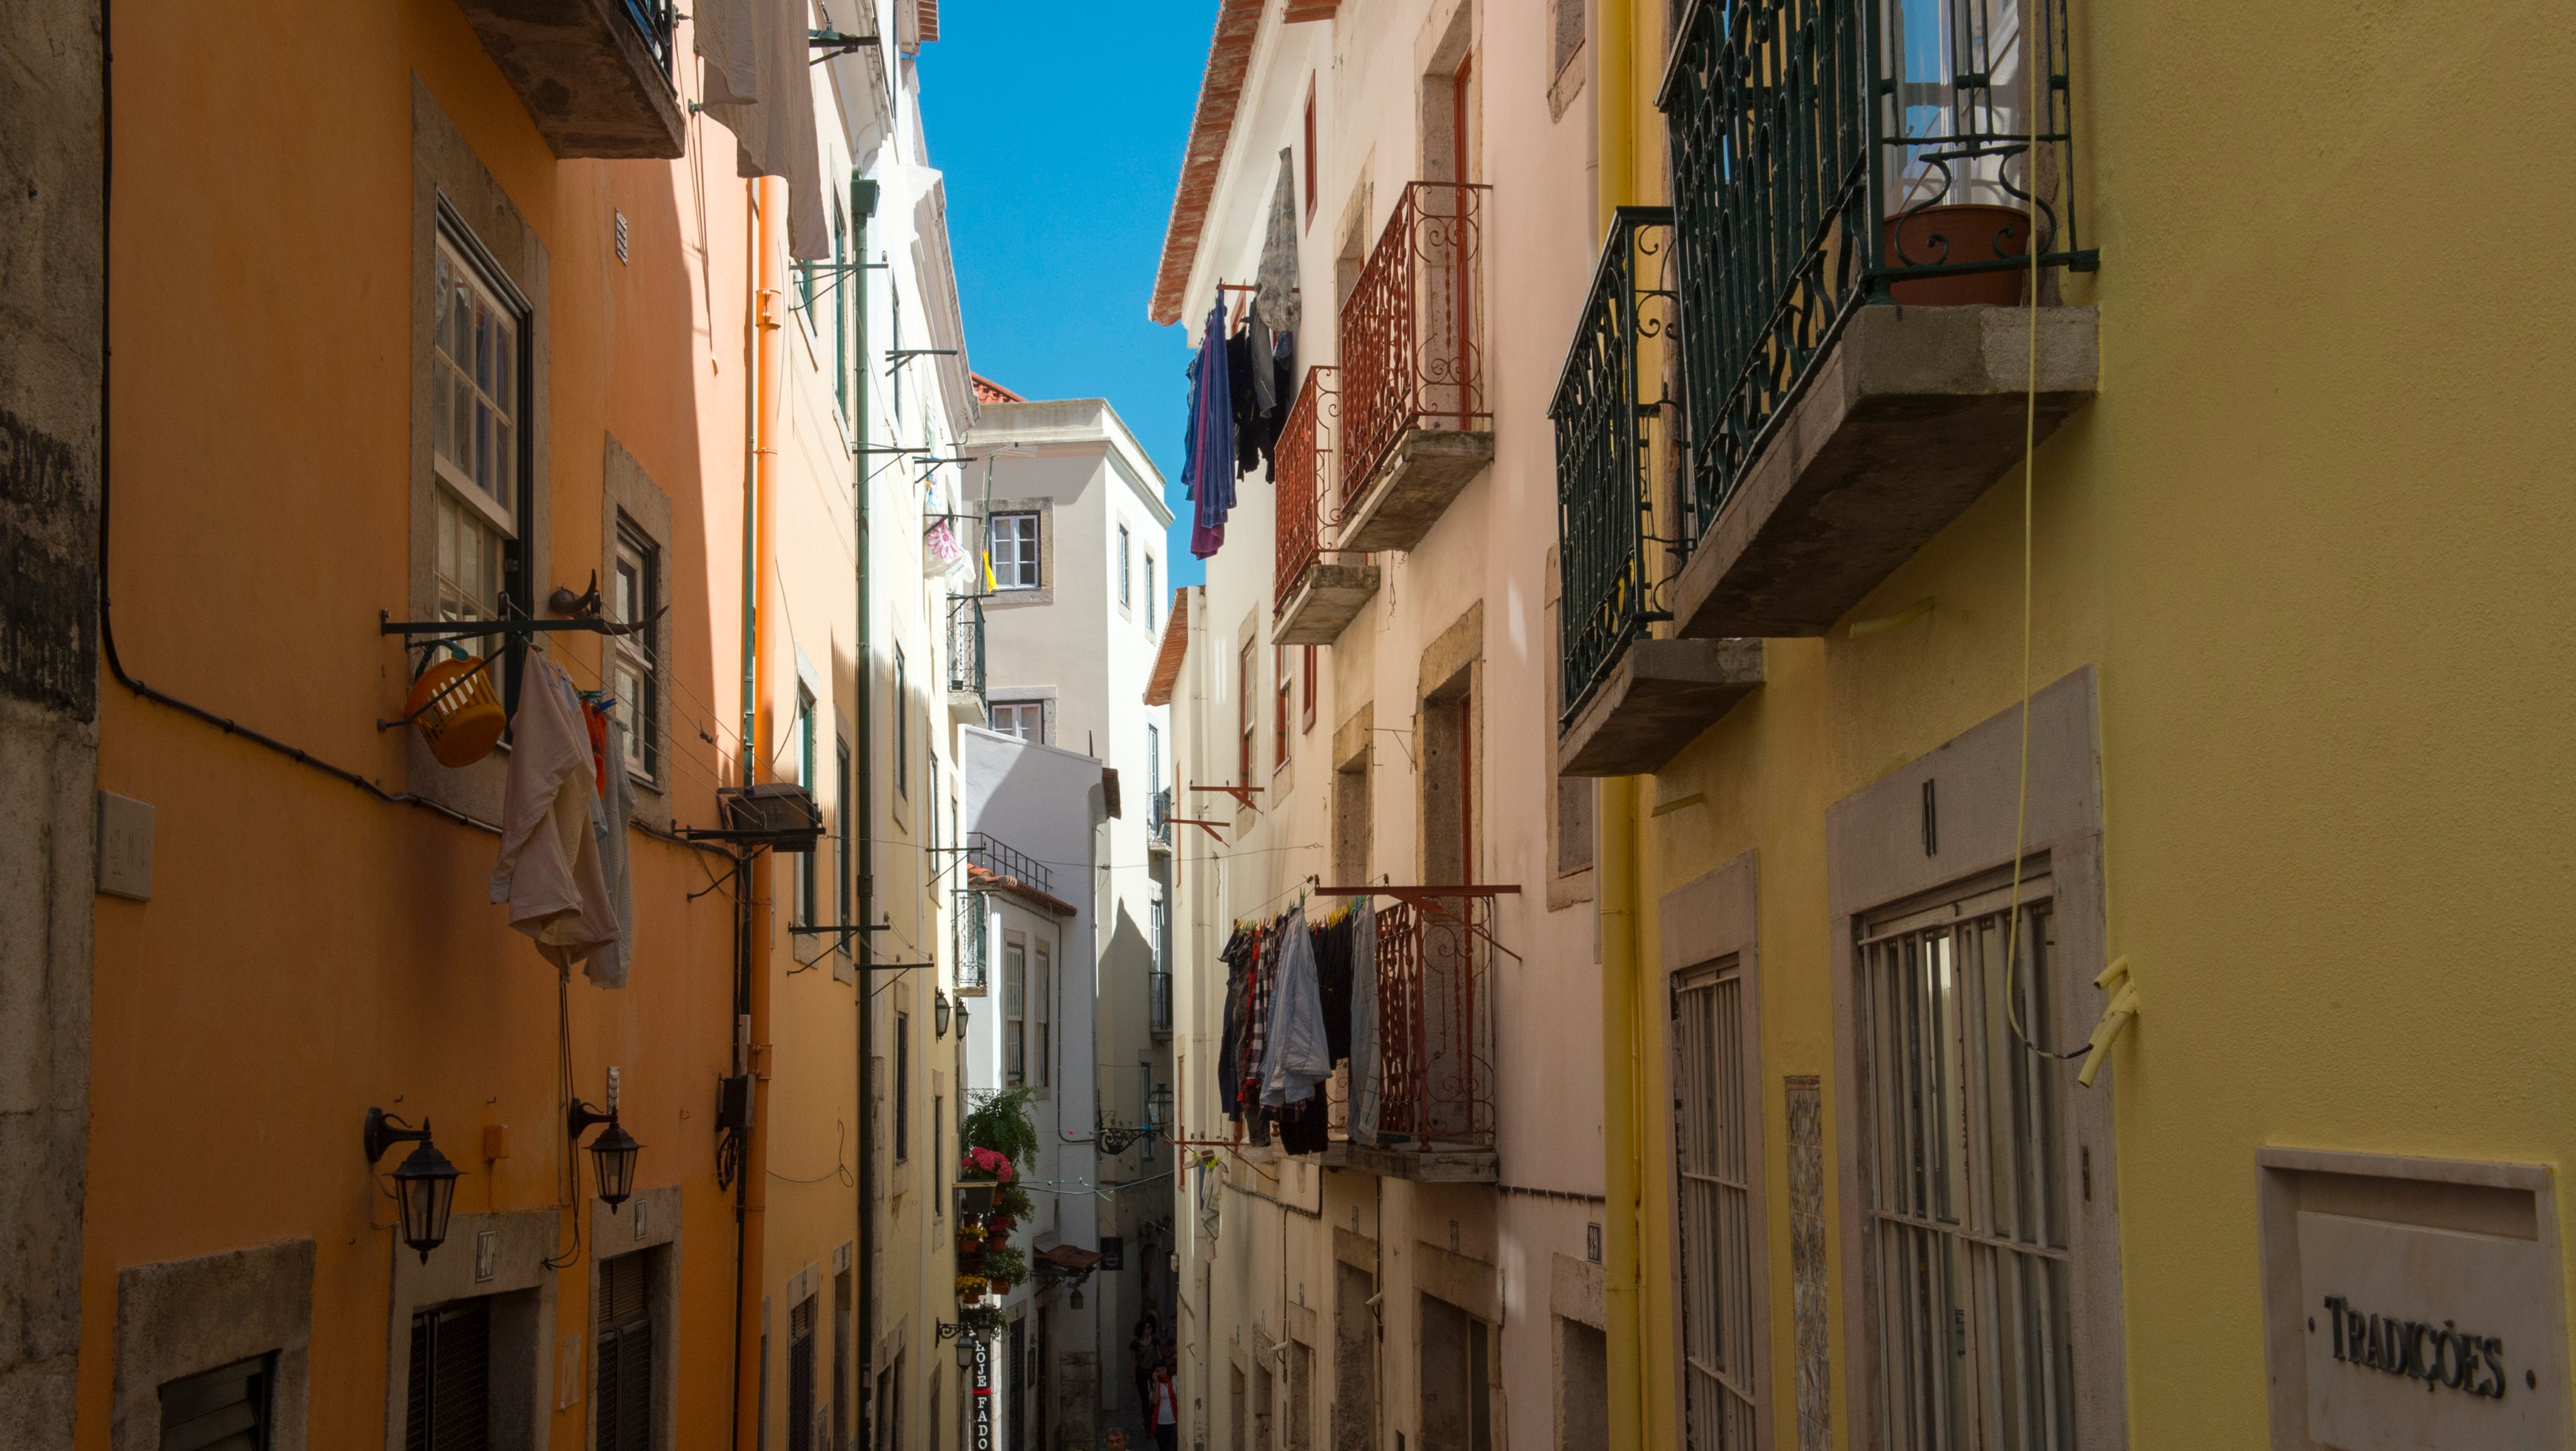 Street scene in the traditional Alfama, the old quarter of,